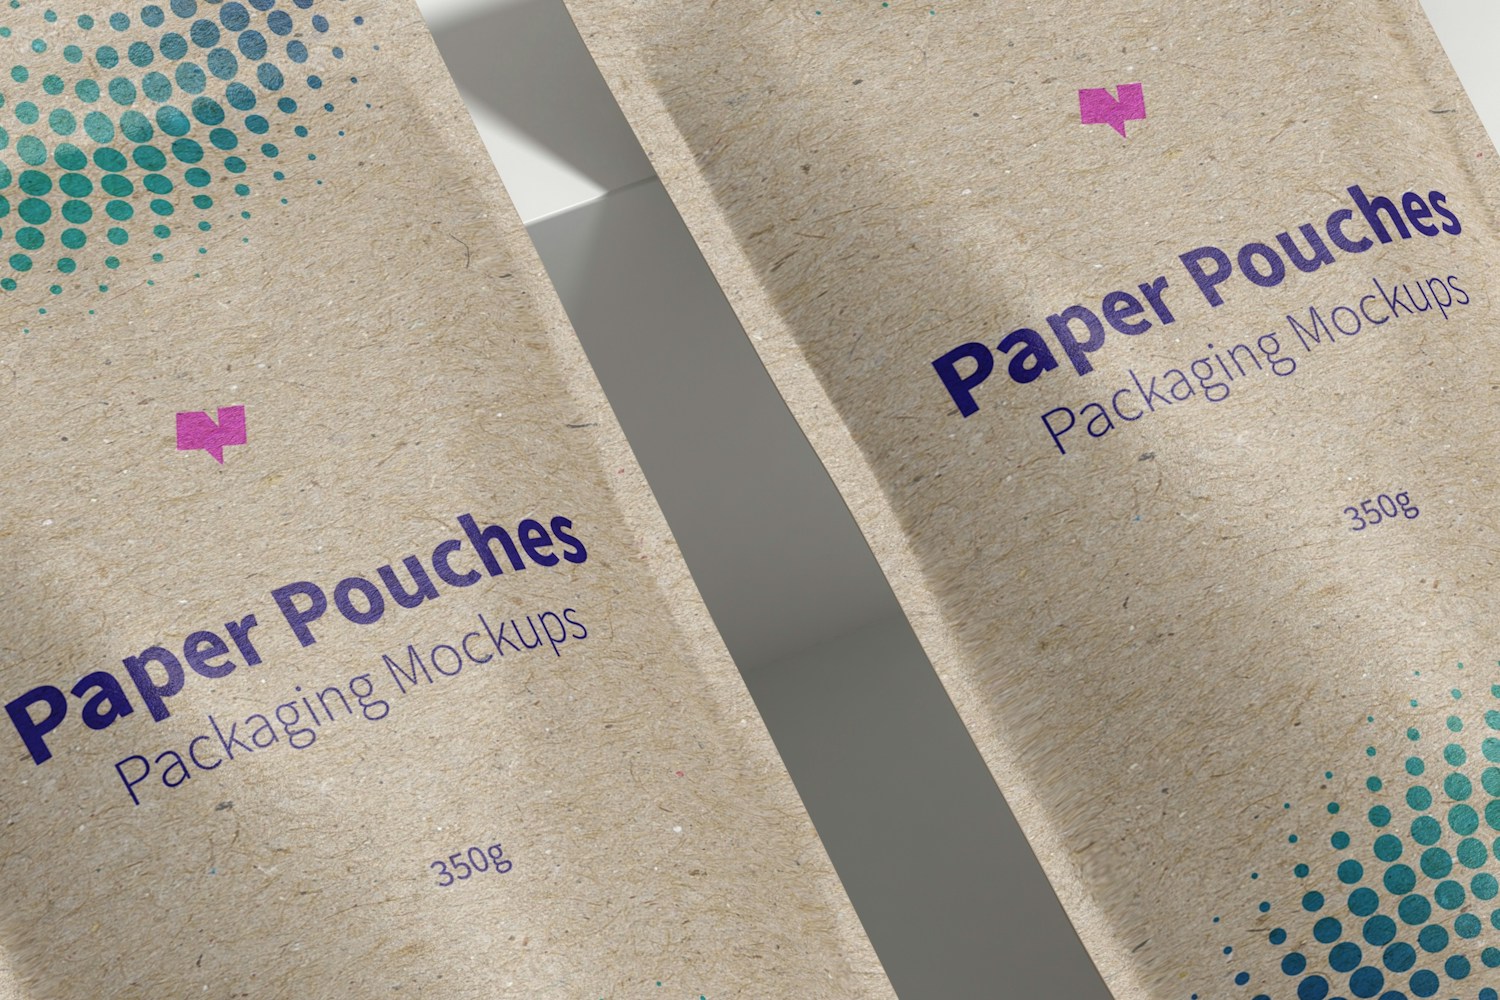 Paper Pouches Packaging Set Mockup